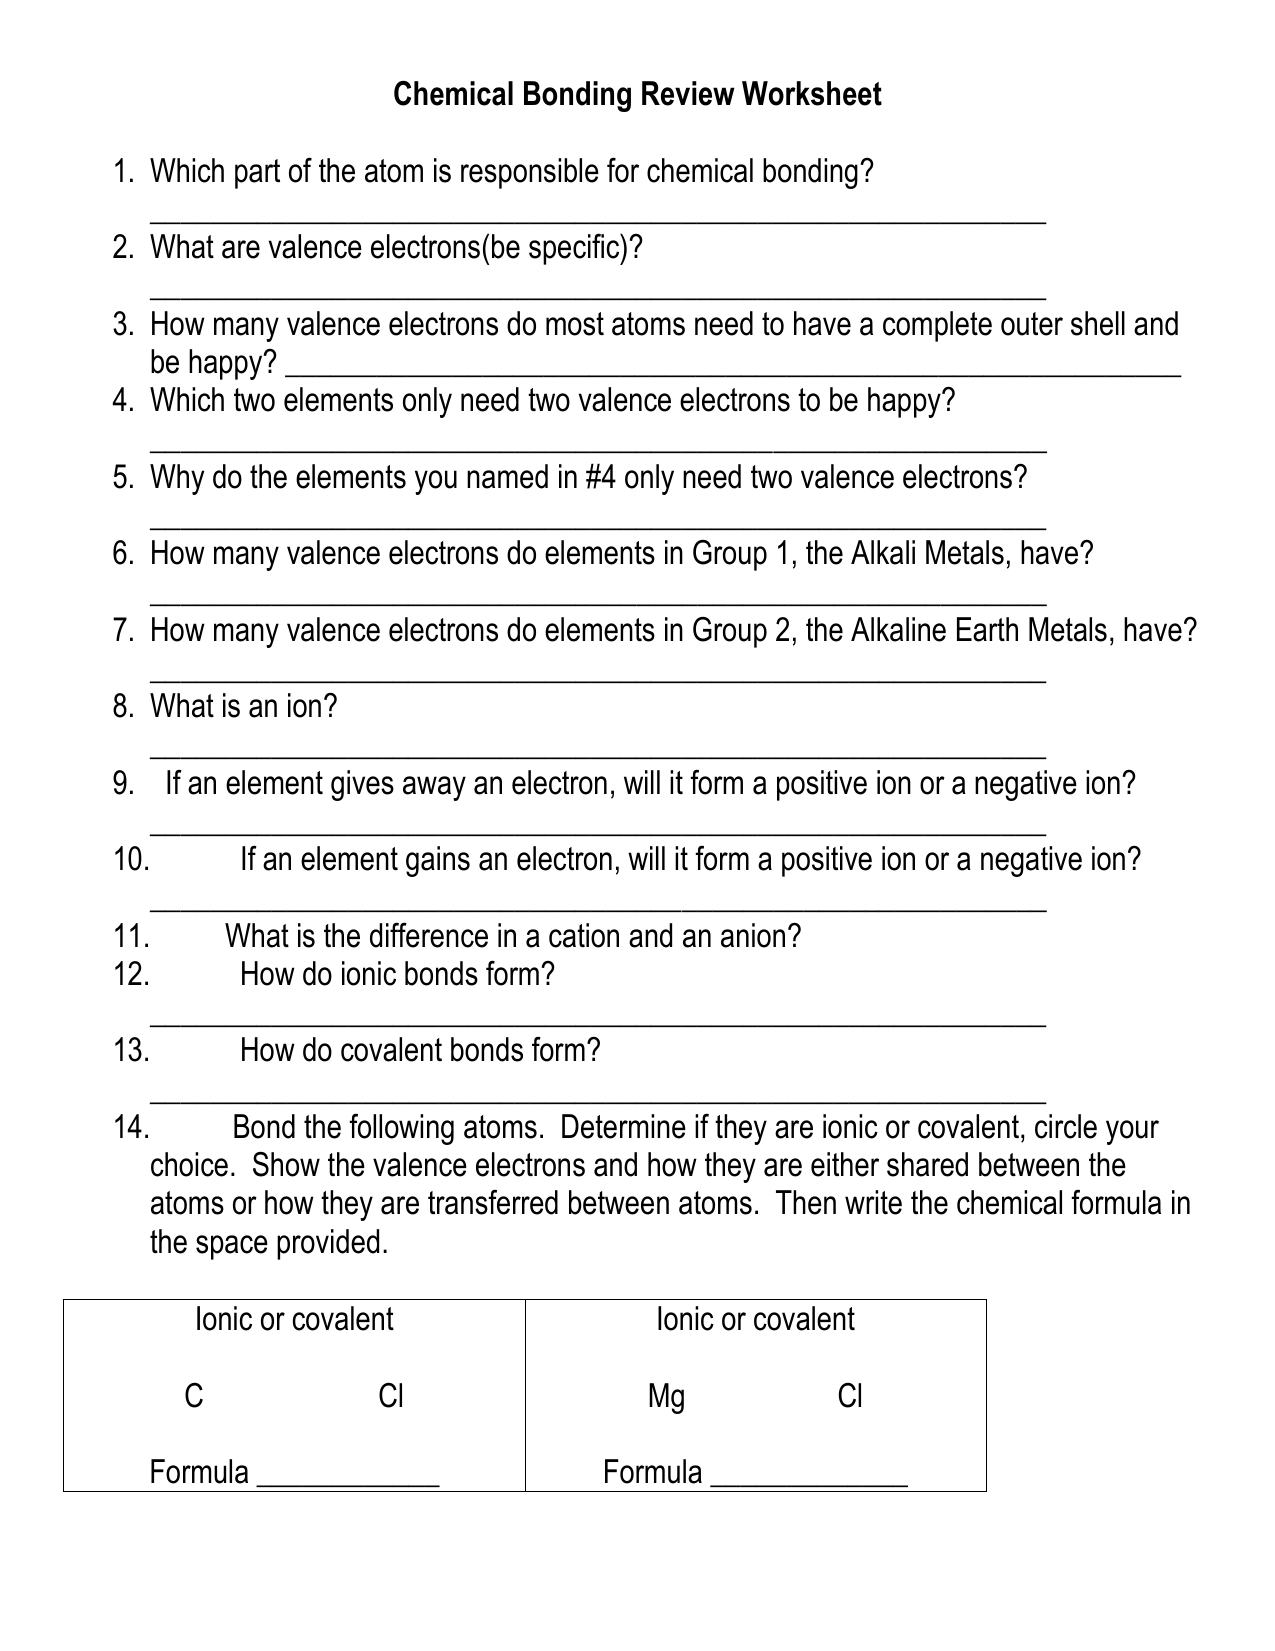 Chemical Bonding Worksheet Answers Key - Promotiontablecovers Within Overview Chemical Bonds Worksheet Answers